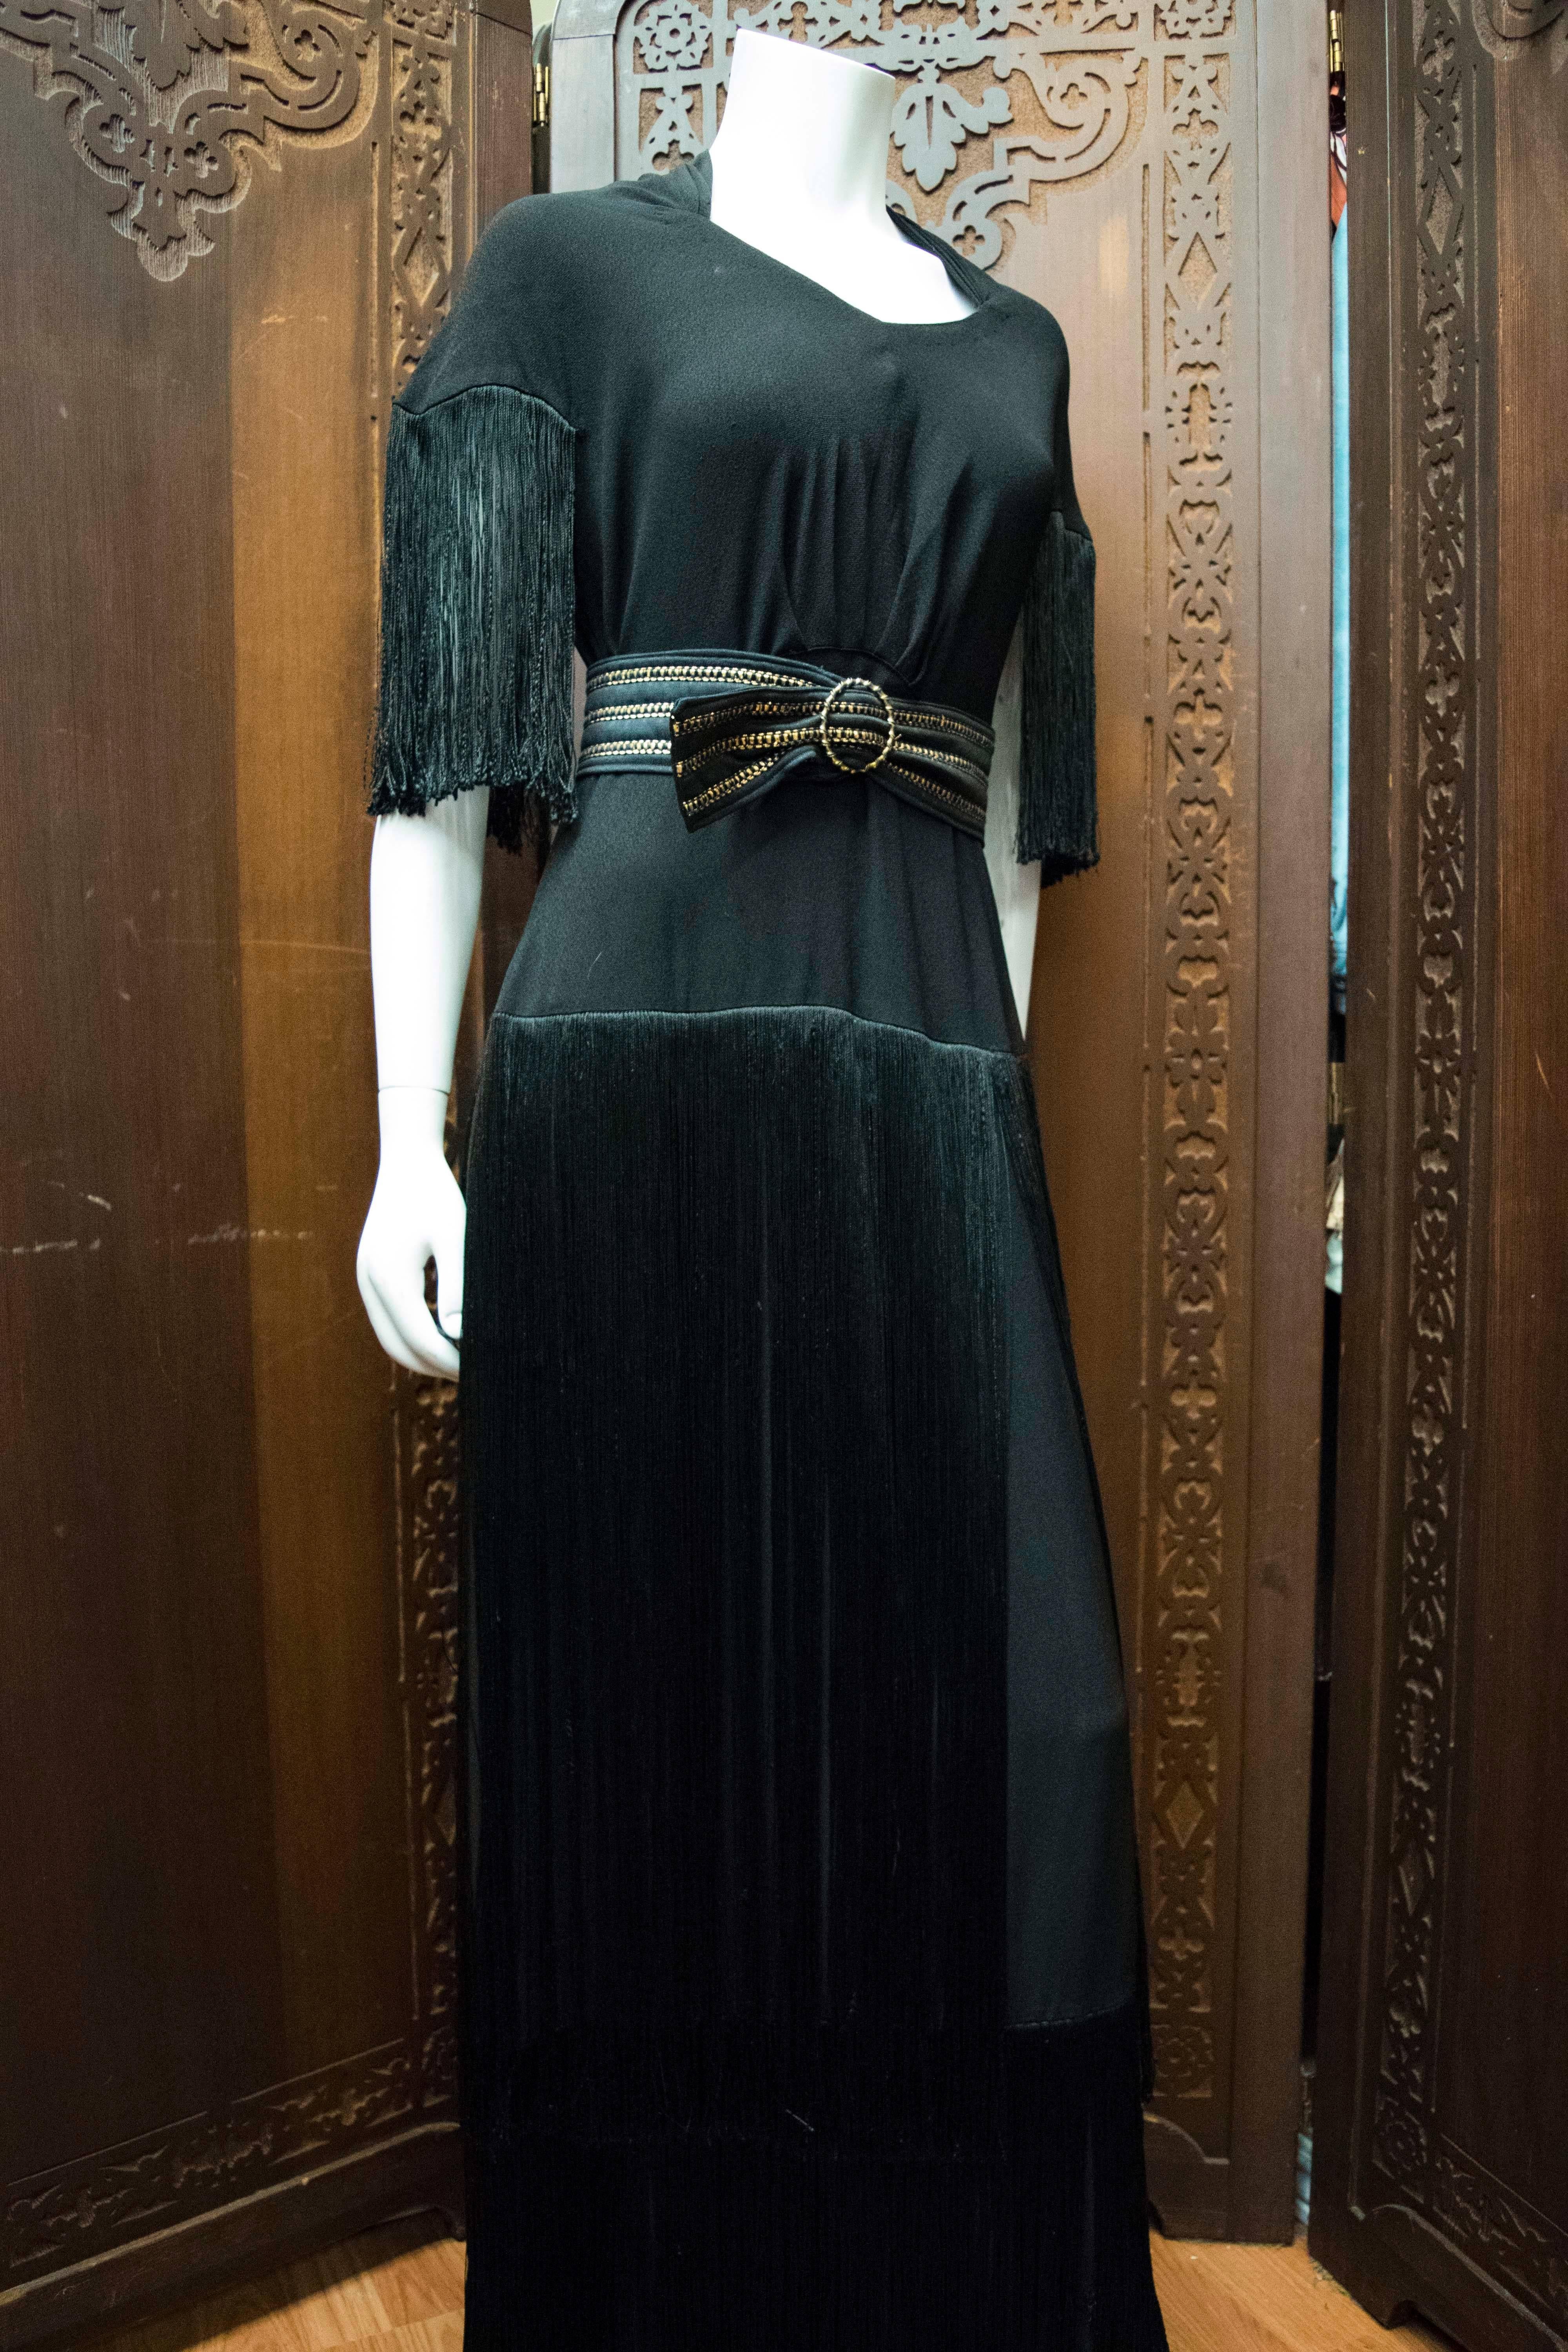 1940s Fringed Evening Dress

A completely wearable size, this dress boasts very long layered silk fringe skirt and silk fringe sleeves. Comes with black and gold belt. 

B 42
W 35
H 42
L 60